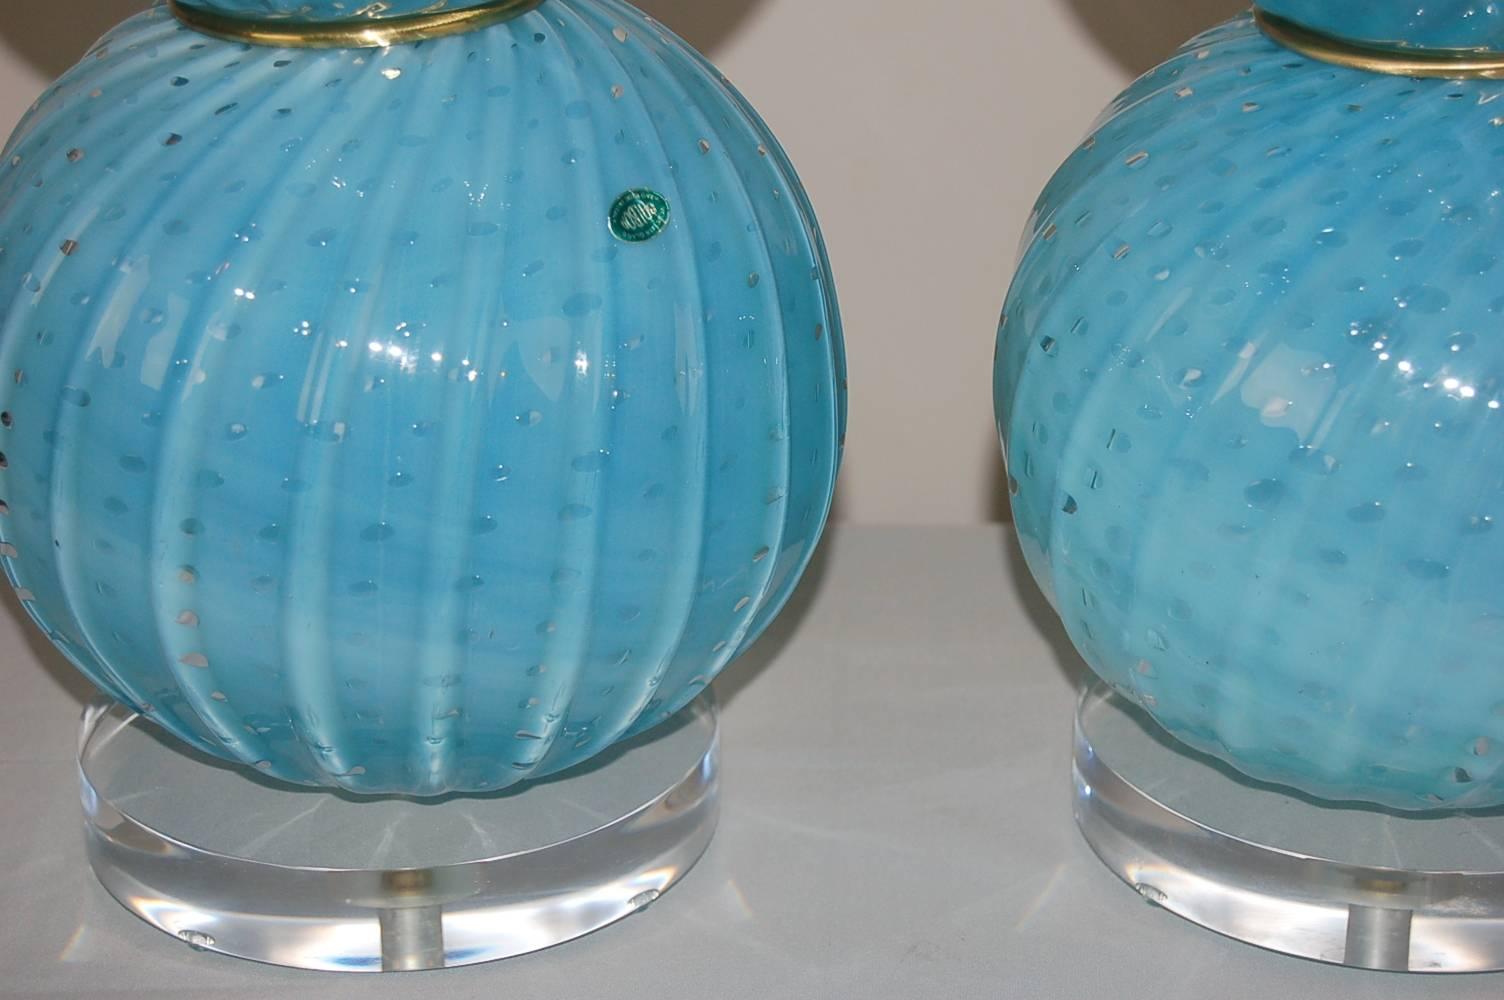 Matched Pair of Vintage Murano Opaline Ball Table Lamps in Blue In Excellent Condition For Sale In Little Rock, AR